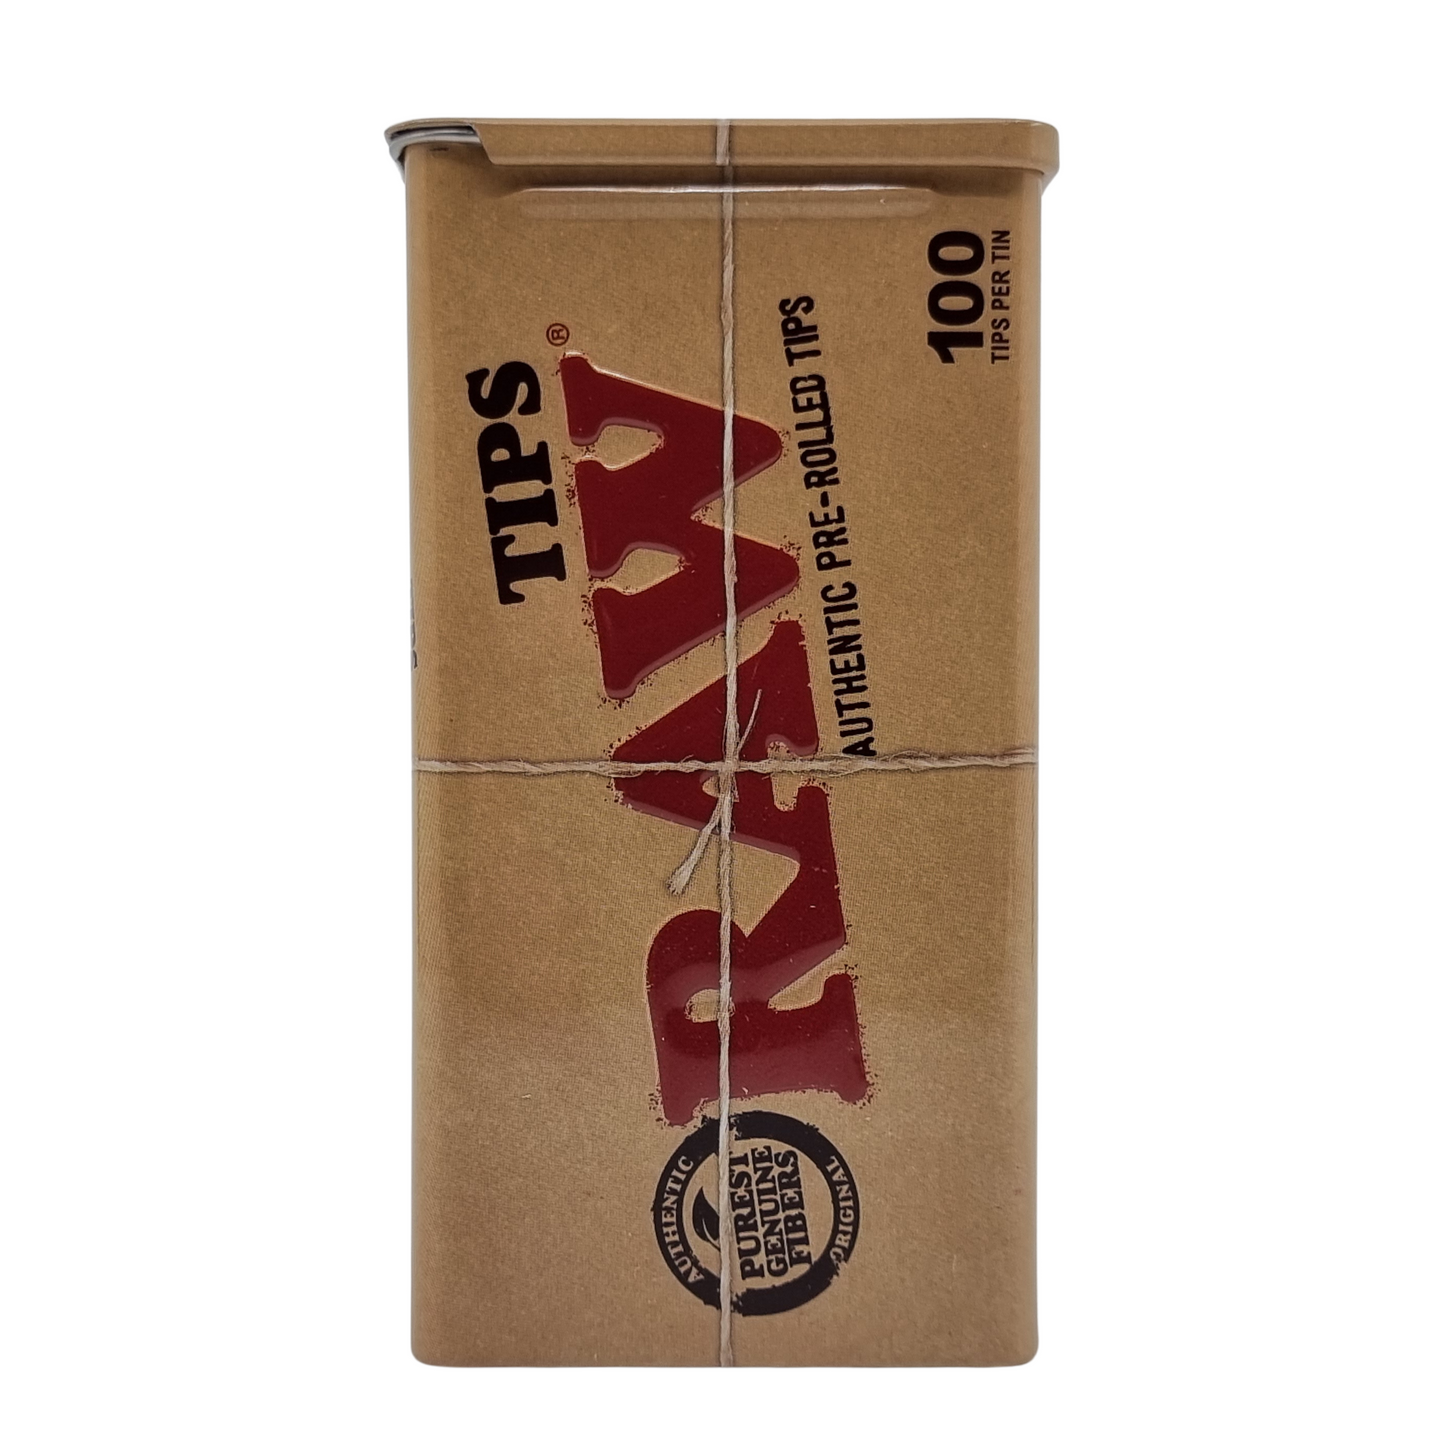 RAW Pre-Rolled Tips Tin 100 pack